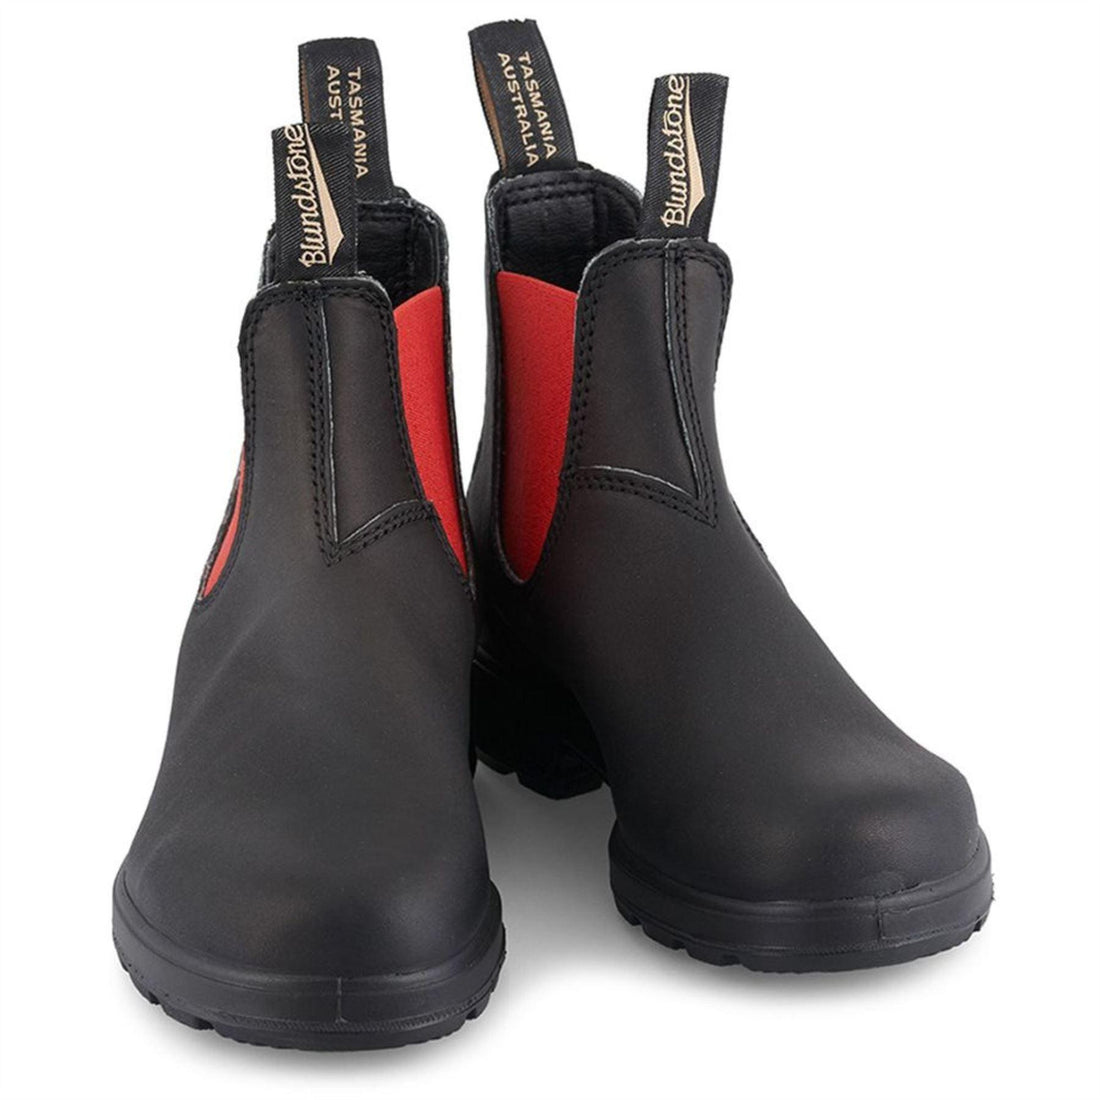 Blundstone 508 Black Red Leather Chelsea Boots Slip On Casual - Knighthood Store